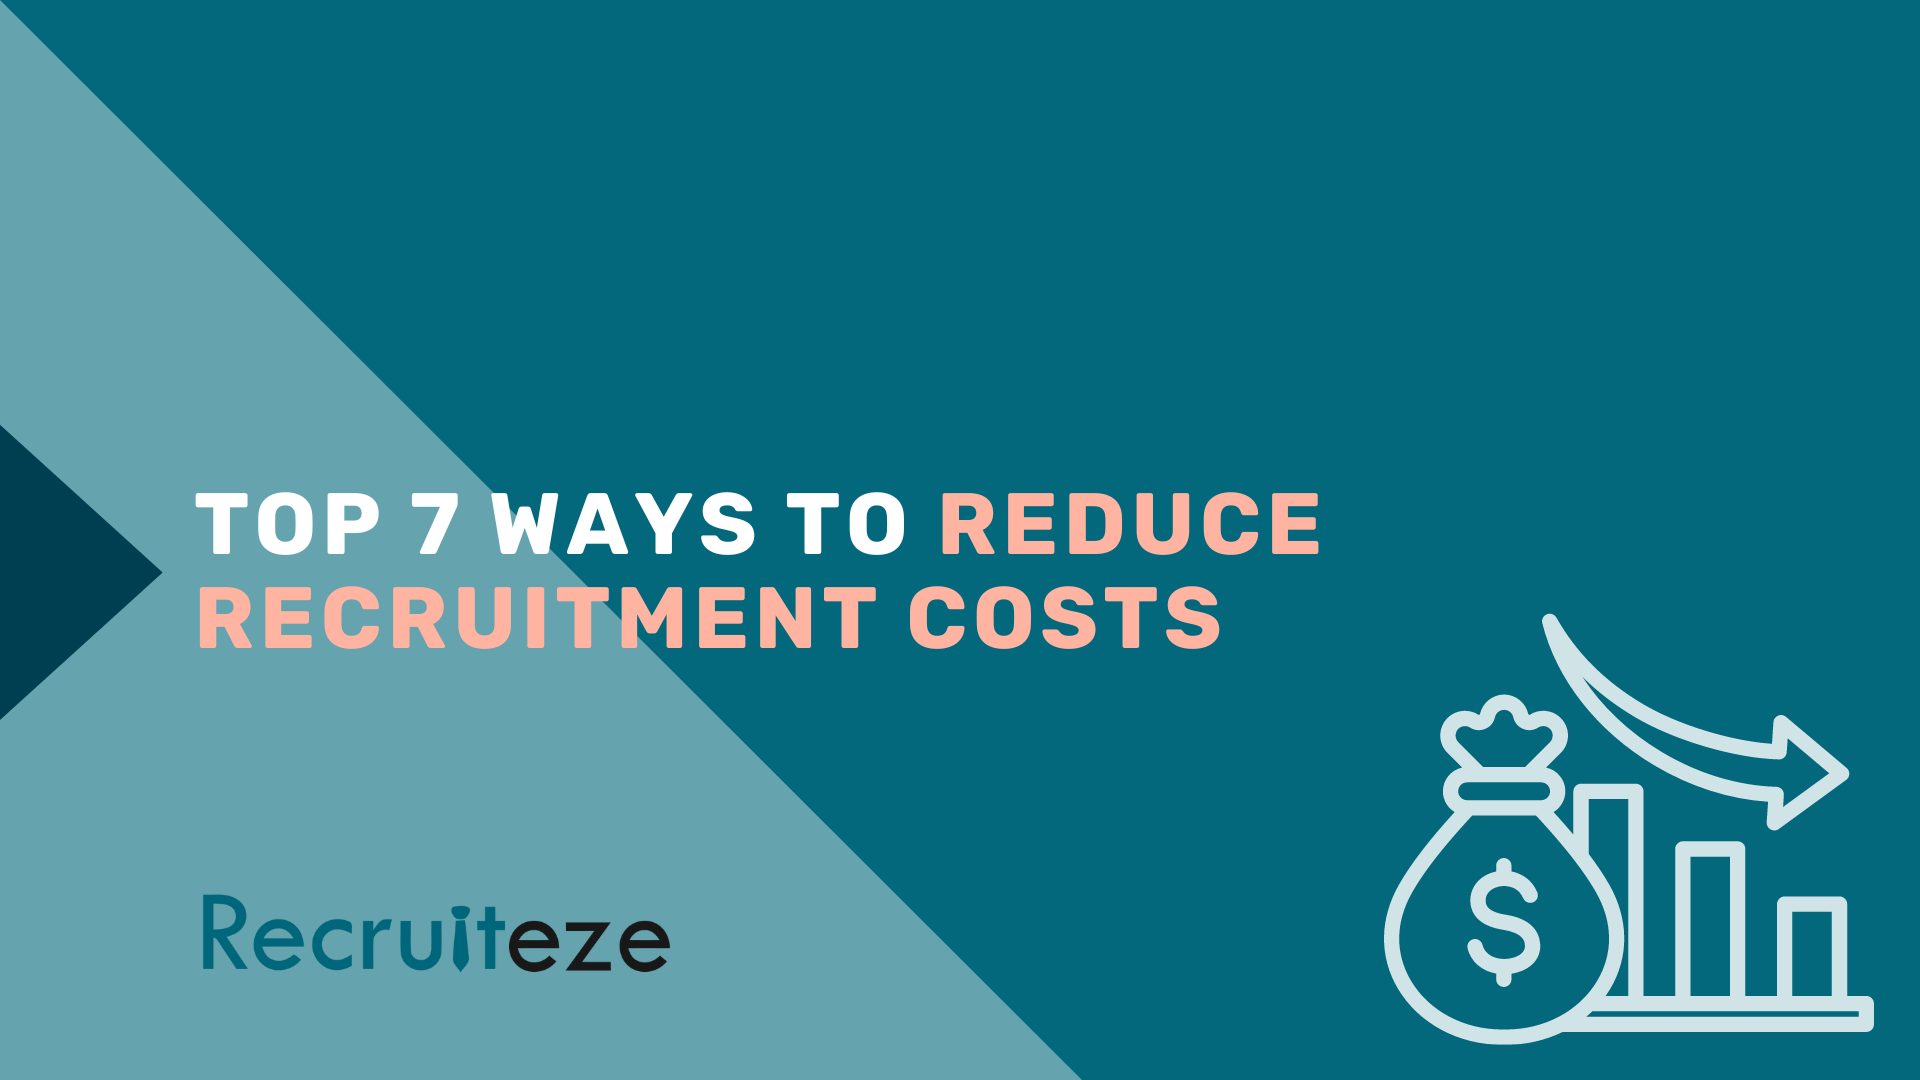 Top 7 Ways To Reduce Recruitment Costs